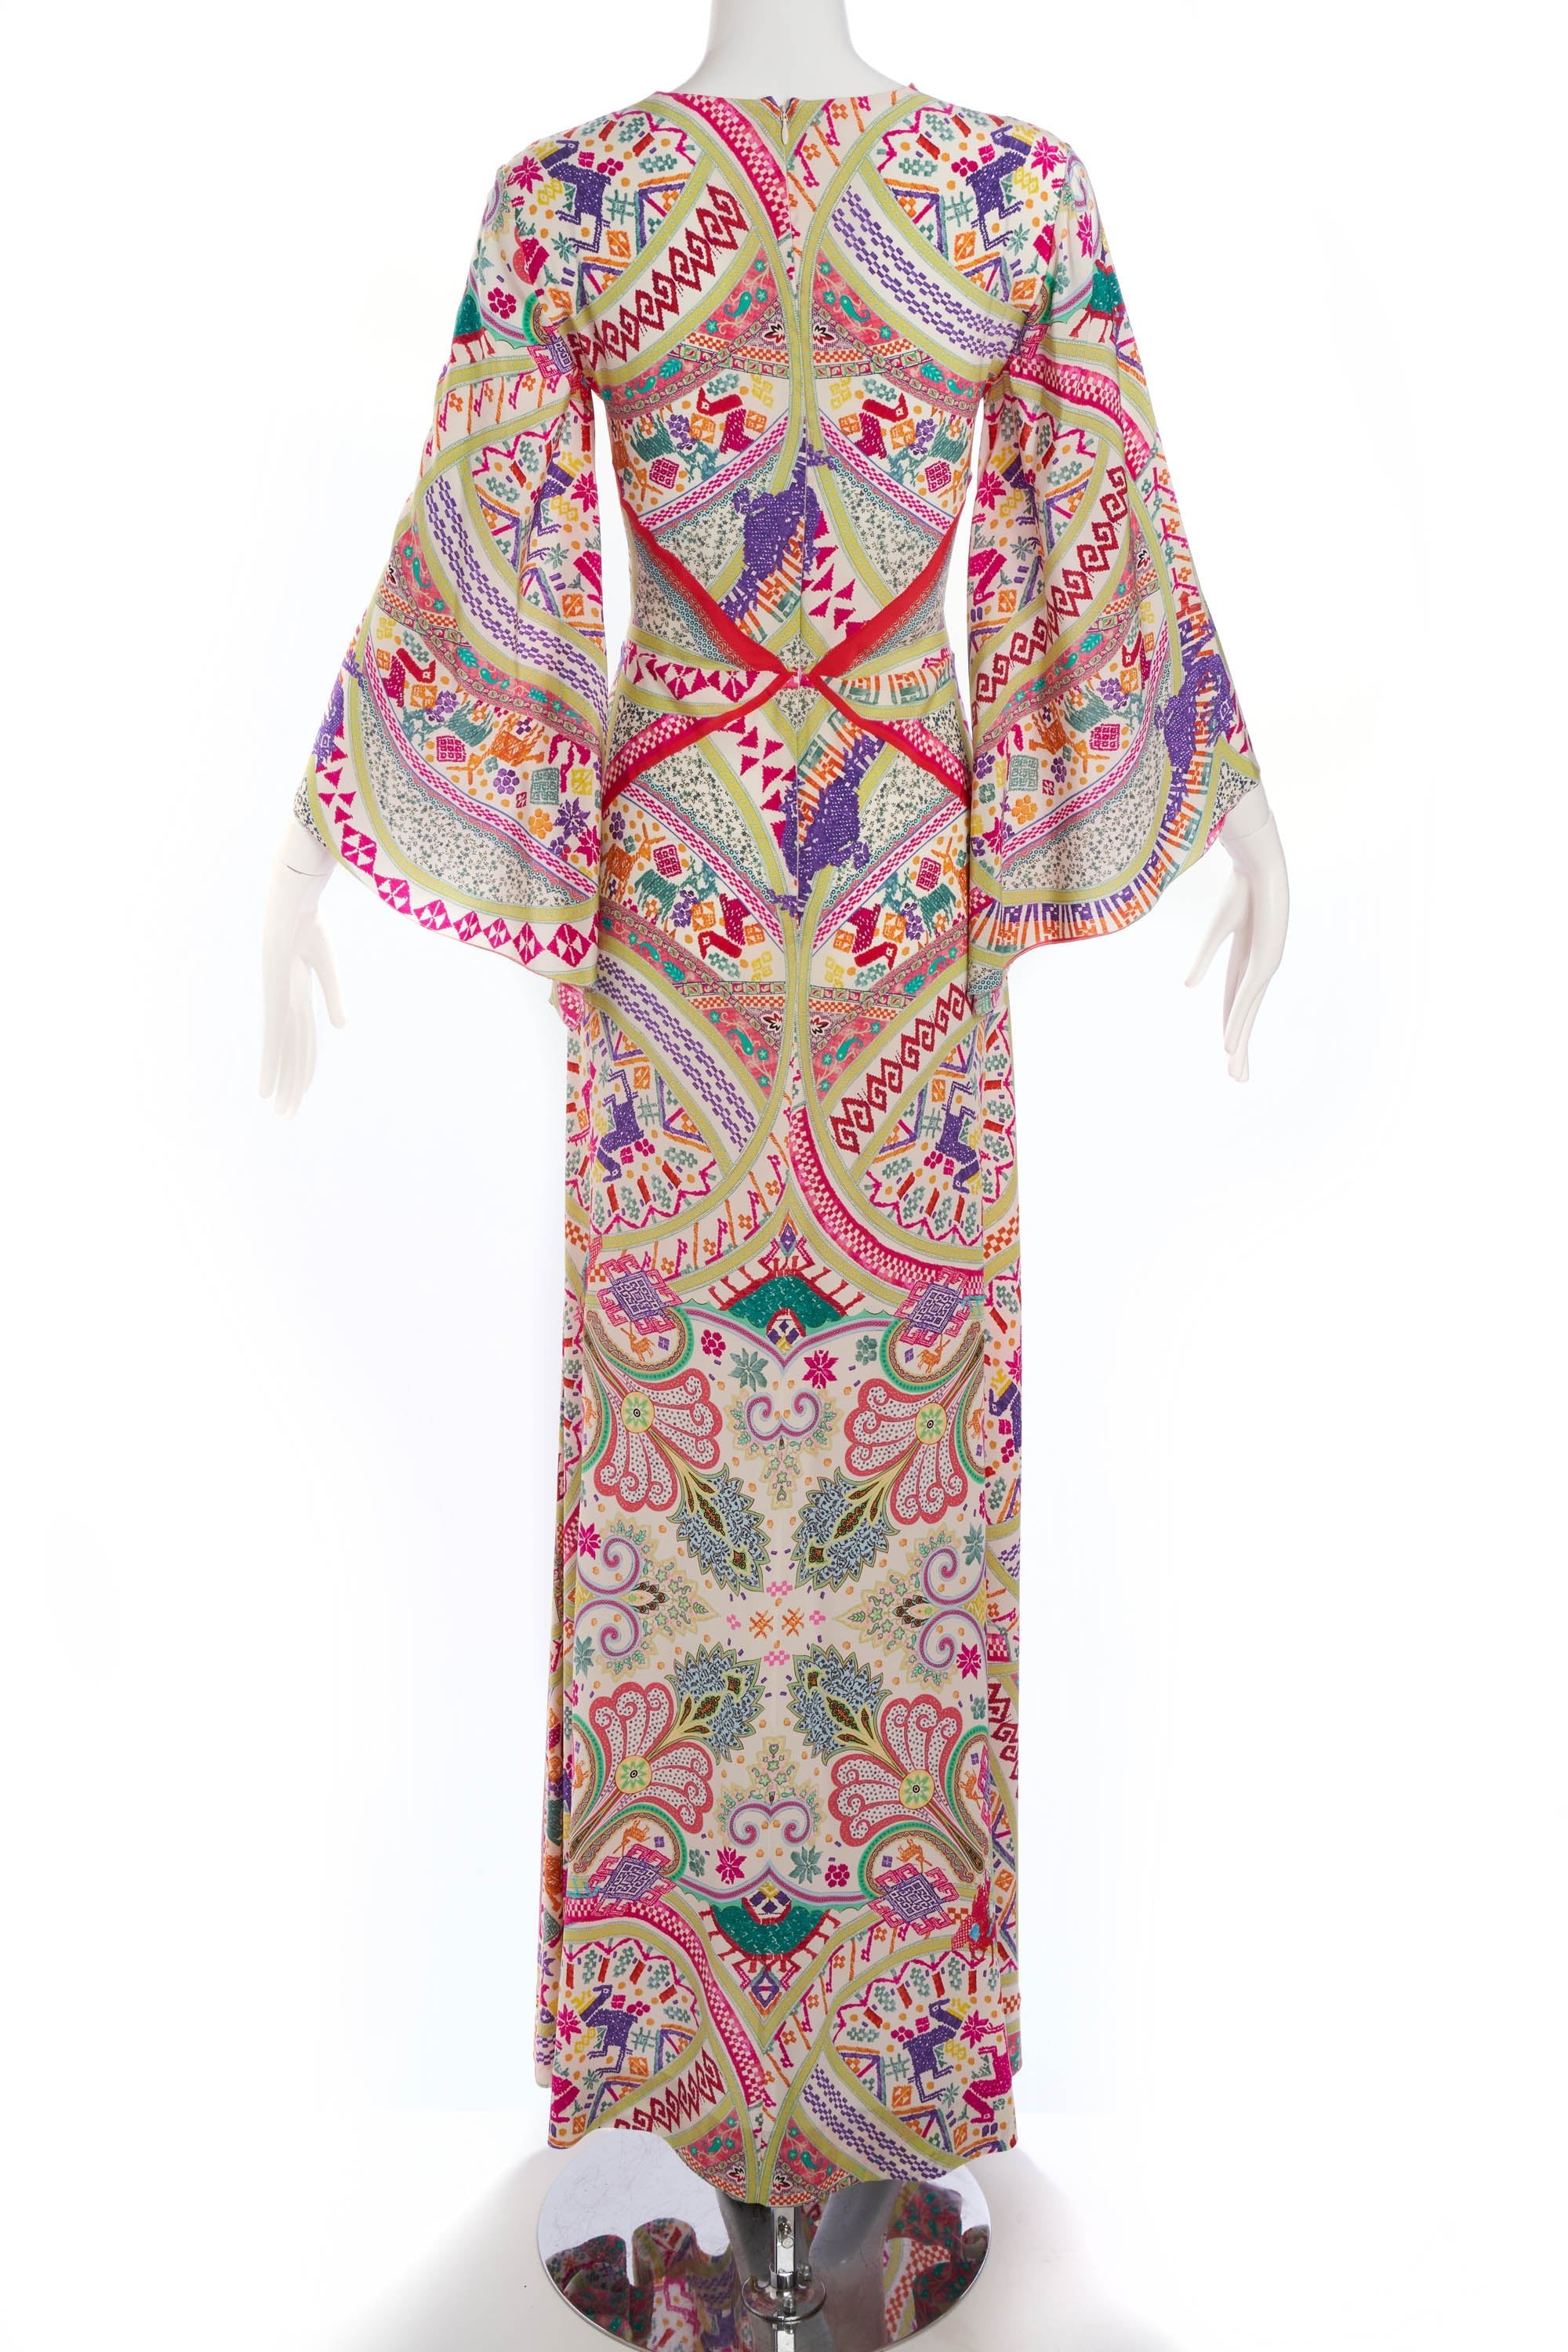 Etro World Travels Cross Hatched Print Maxi Dress - Foxy Couture Carmel